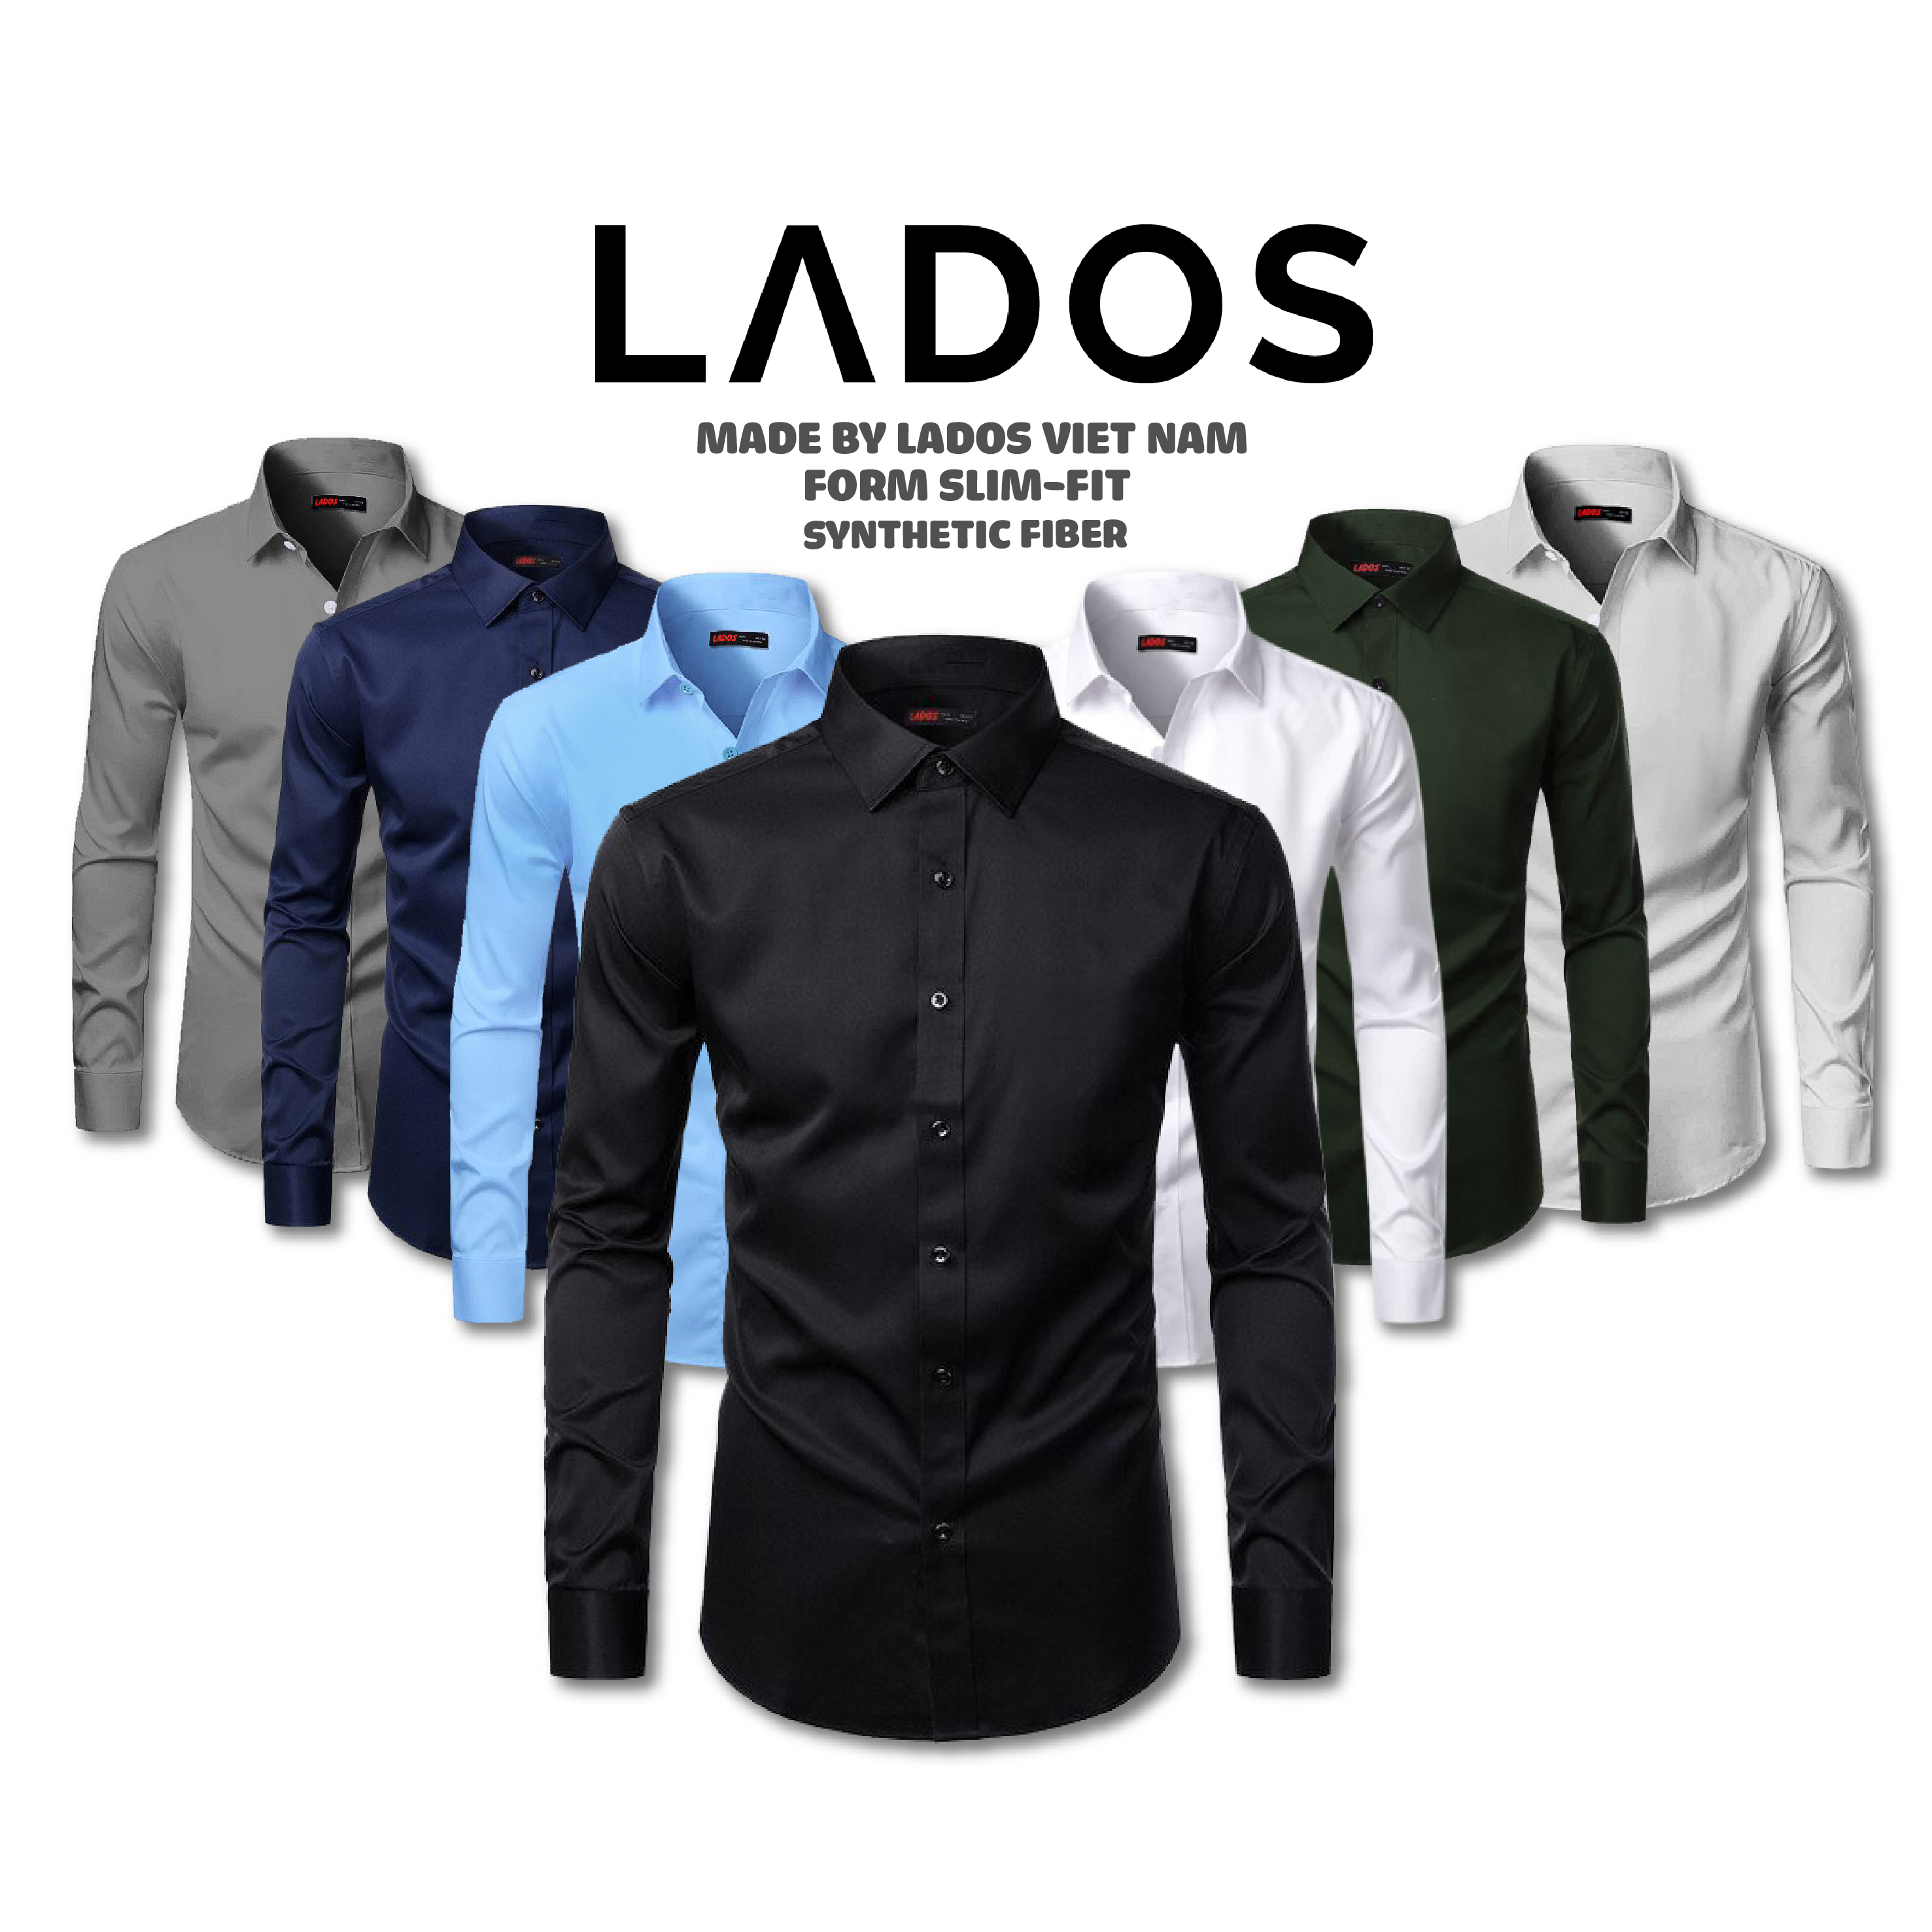 Shirt male long-sleeved high-grade fabric anti-wrinkle lados-1779, soft quality form đẹp